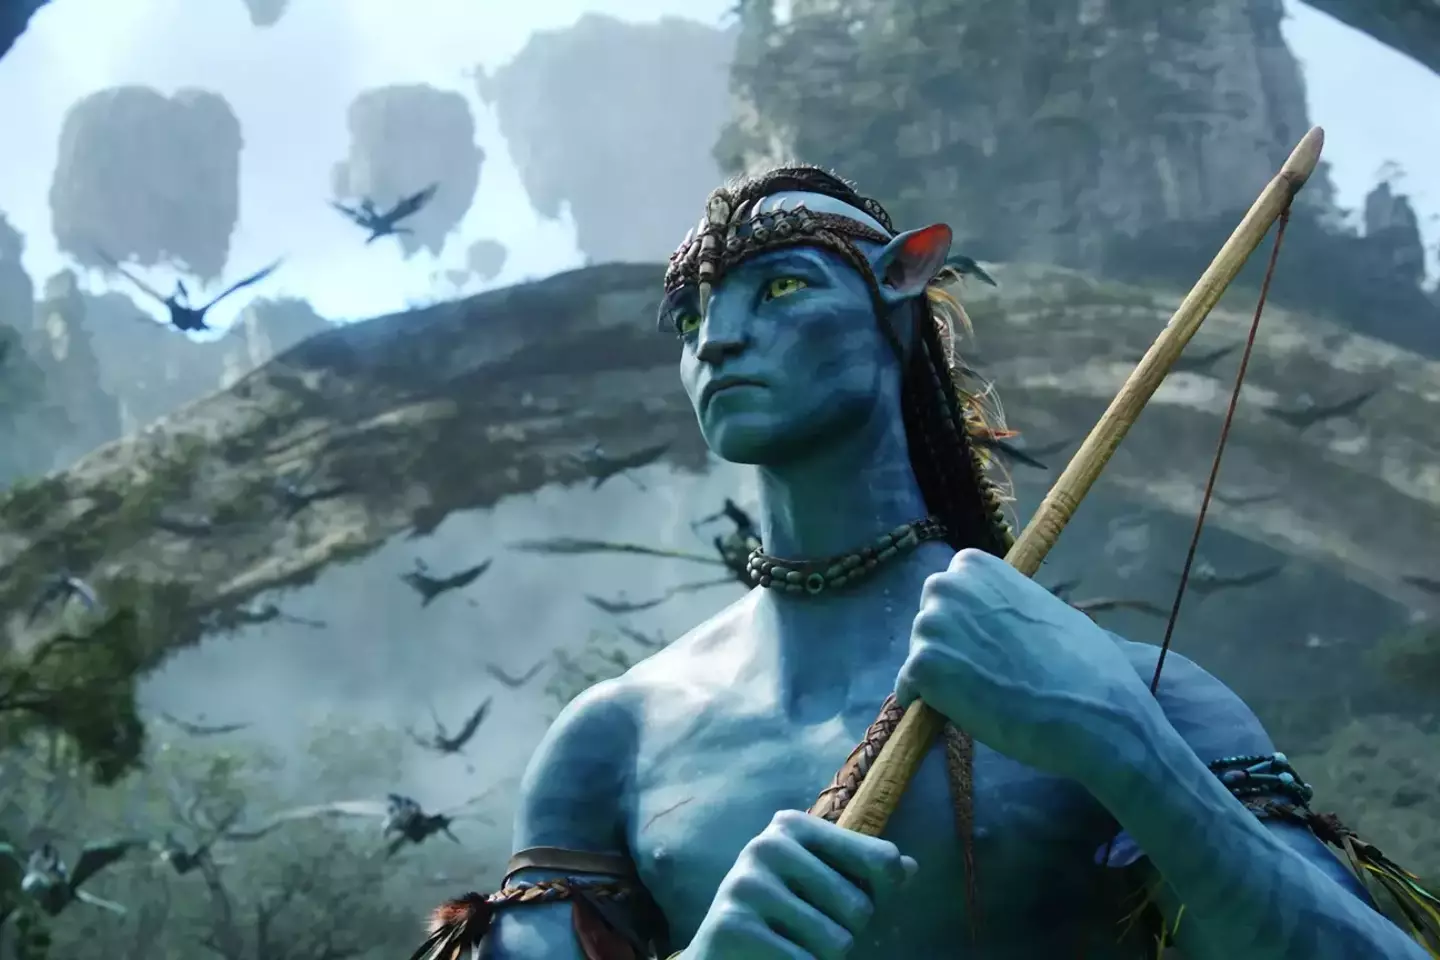 Avatar went on to gross over $2 billion at the box office.